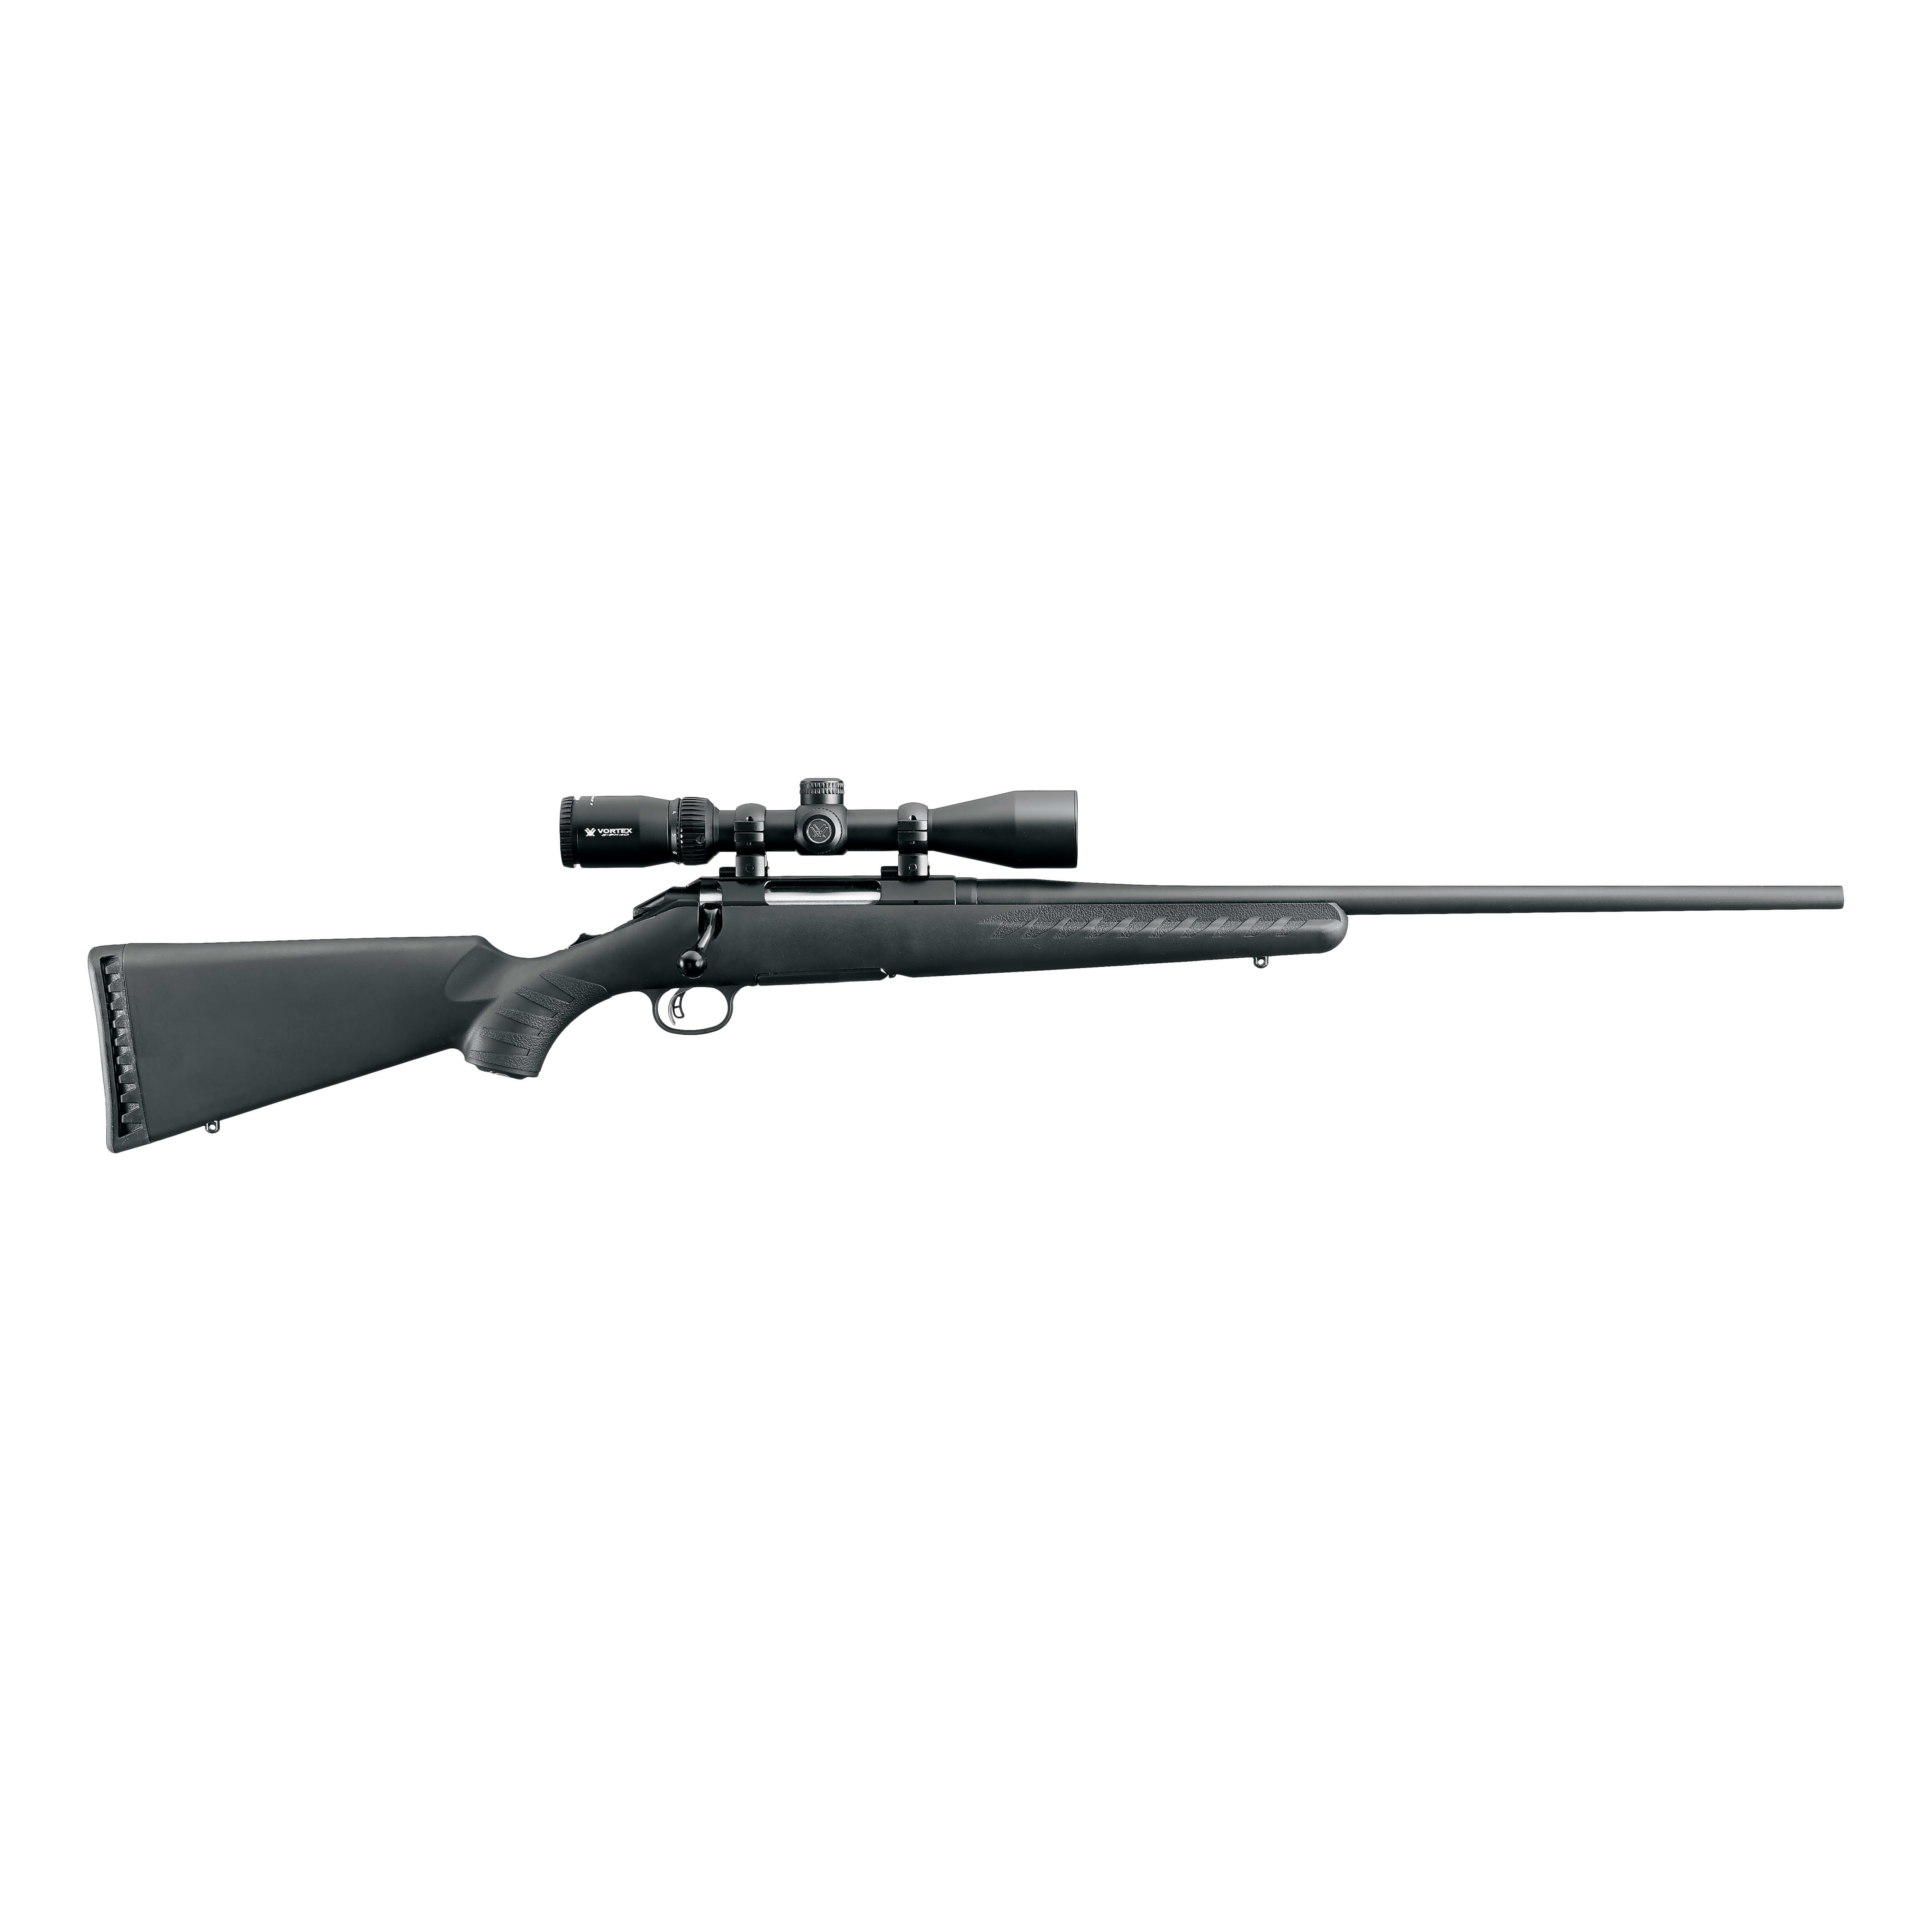 Ruger 16932 American Bolt-Action Rifle Combo 270 Win 22" Syn Matte w/ Vortex Crossfire II 3-9x40 riflescope, 0604-1813